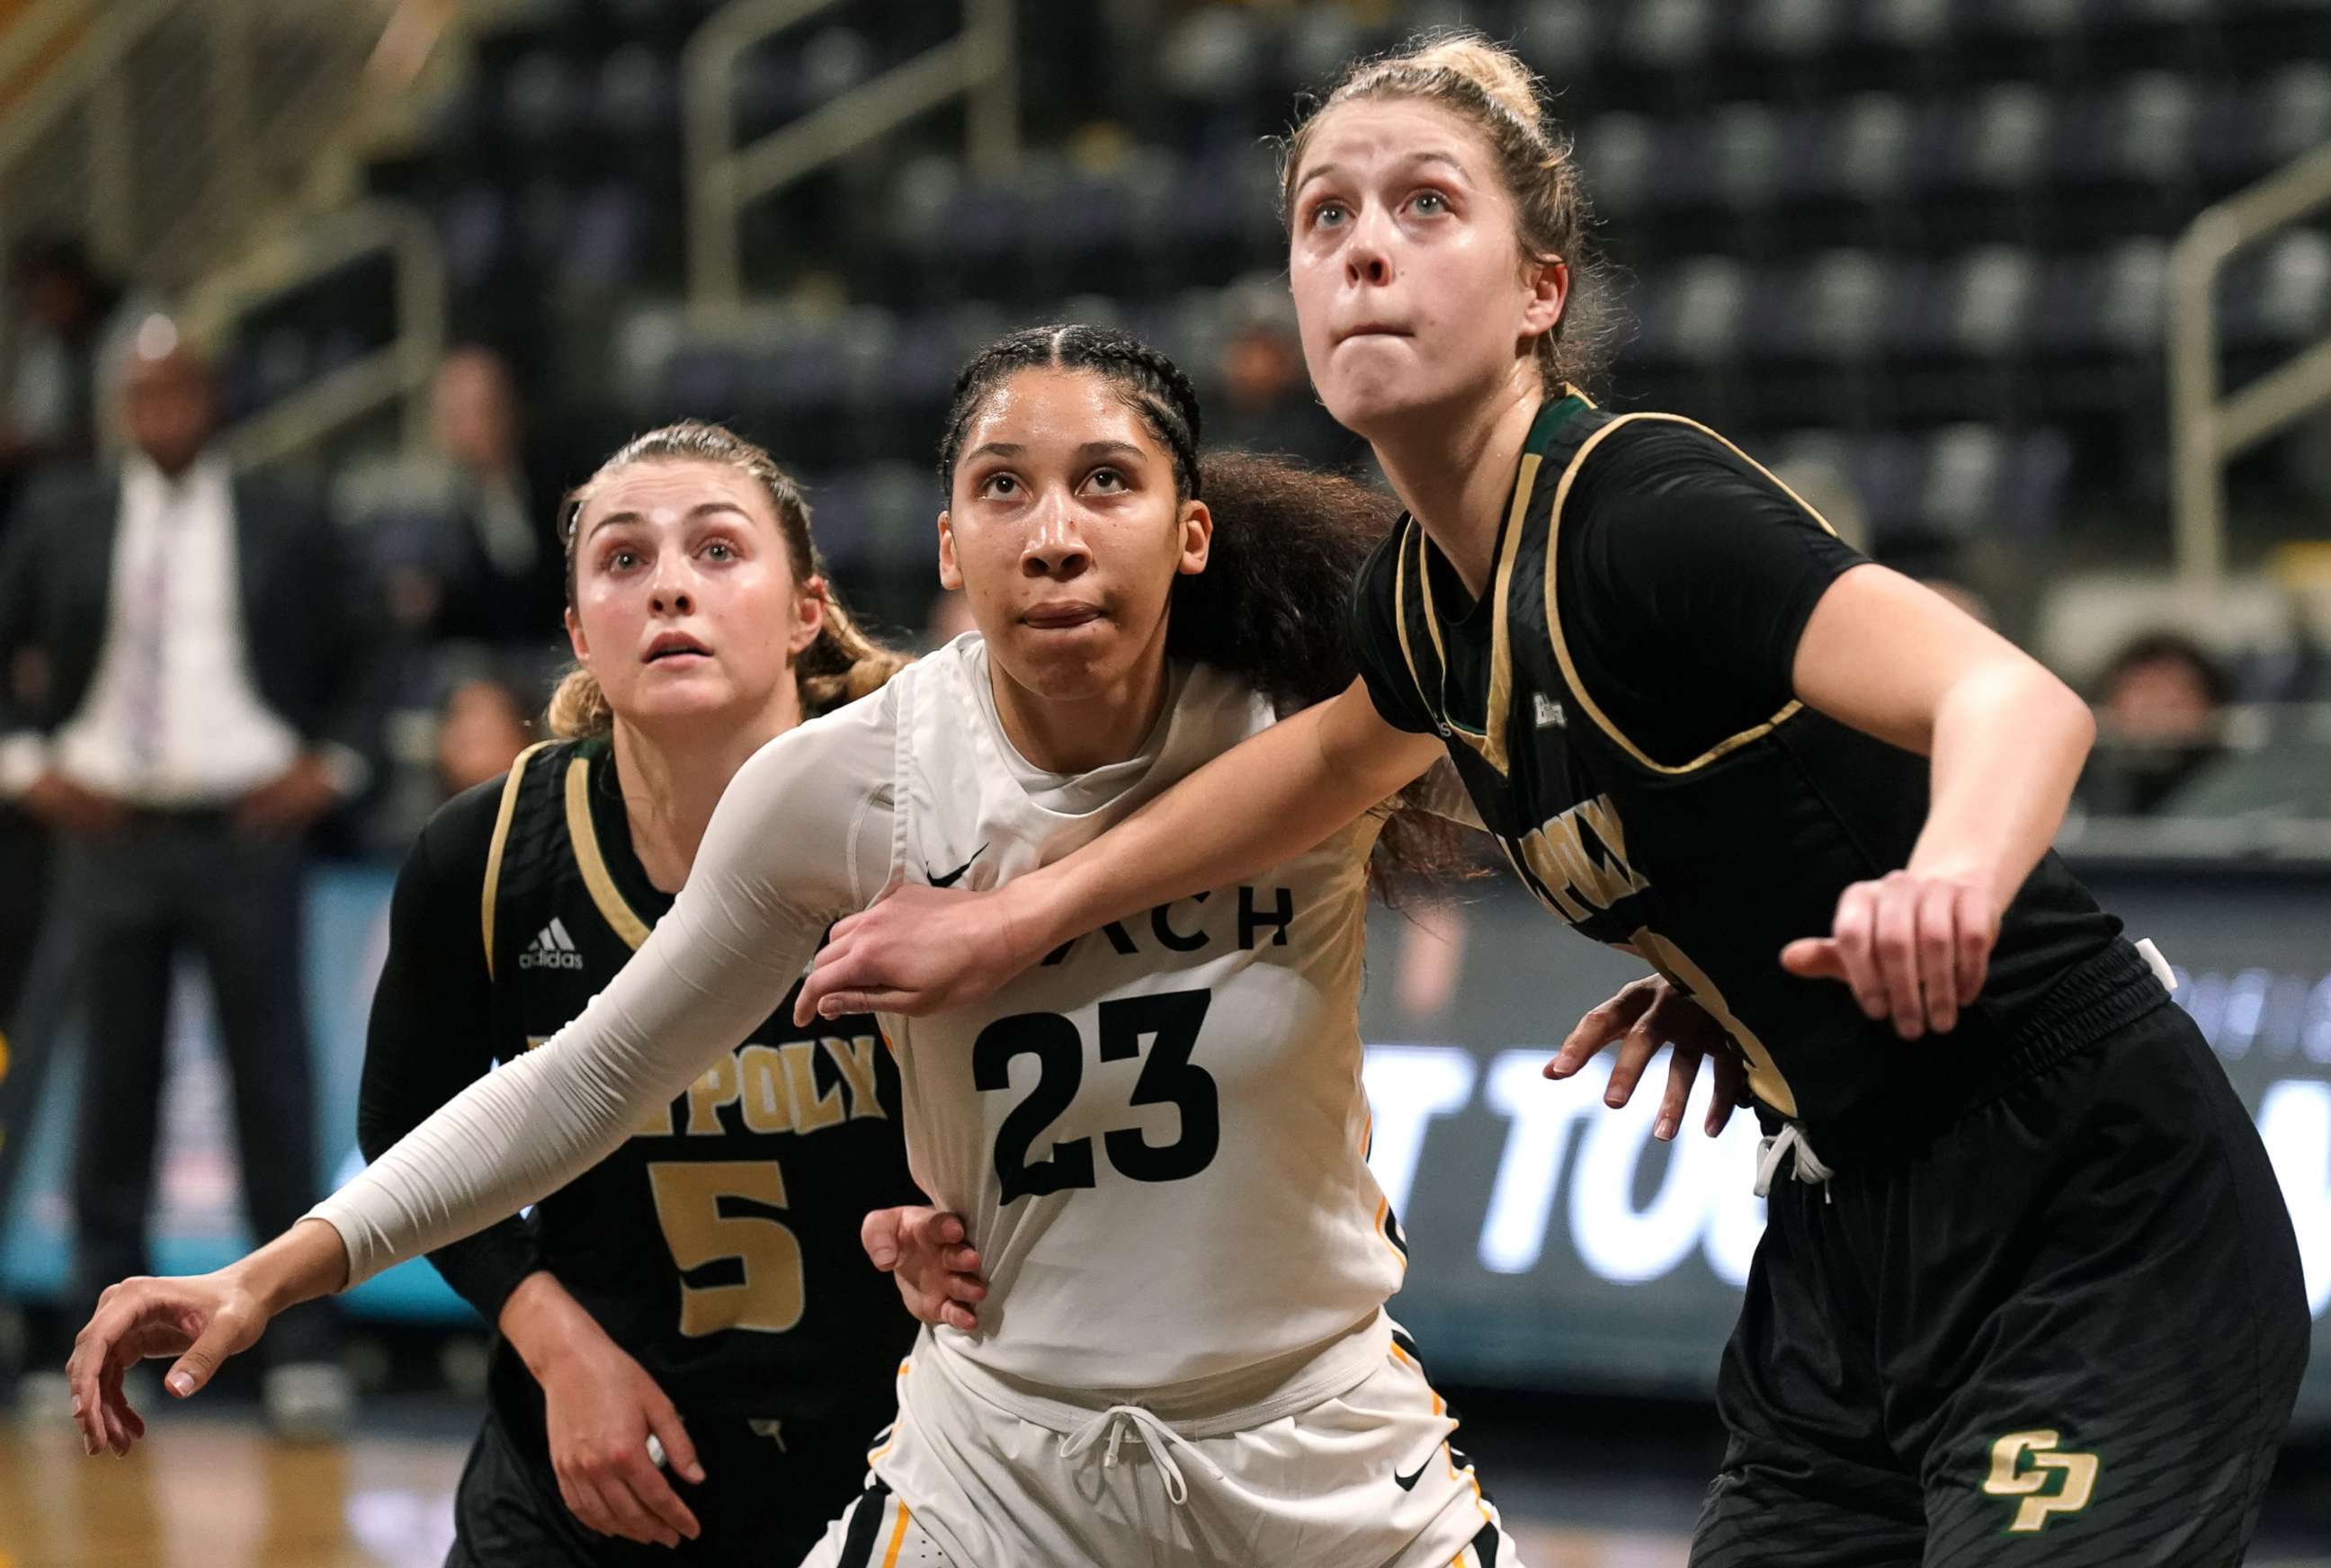 PHOTO: Long Beach State plays a game against Cal Poly Mustangs during a basketball tournament in Long Beach, Calif., March 10, 2020, without fans in the early days of the coronavirus pandemic.